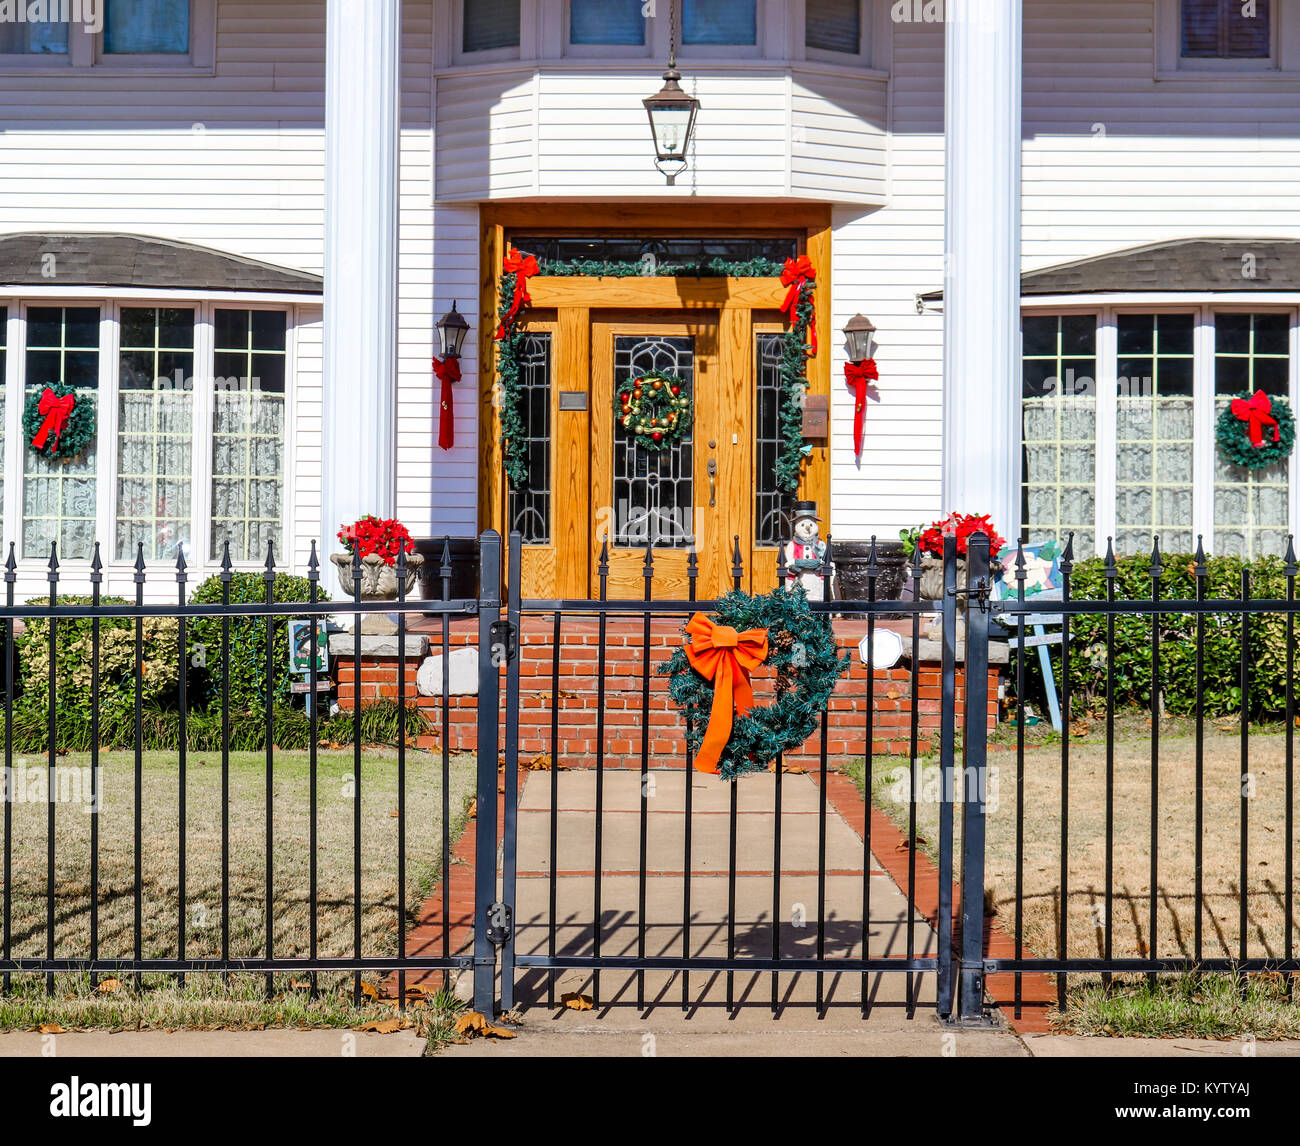 Entrance gate and porch of upscale house with tall pillars bay windows and leaded glass doors all decorated for Christmas with wreaths and bows and po Stock Photo